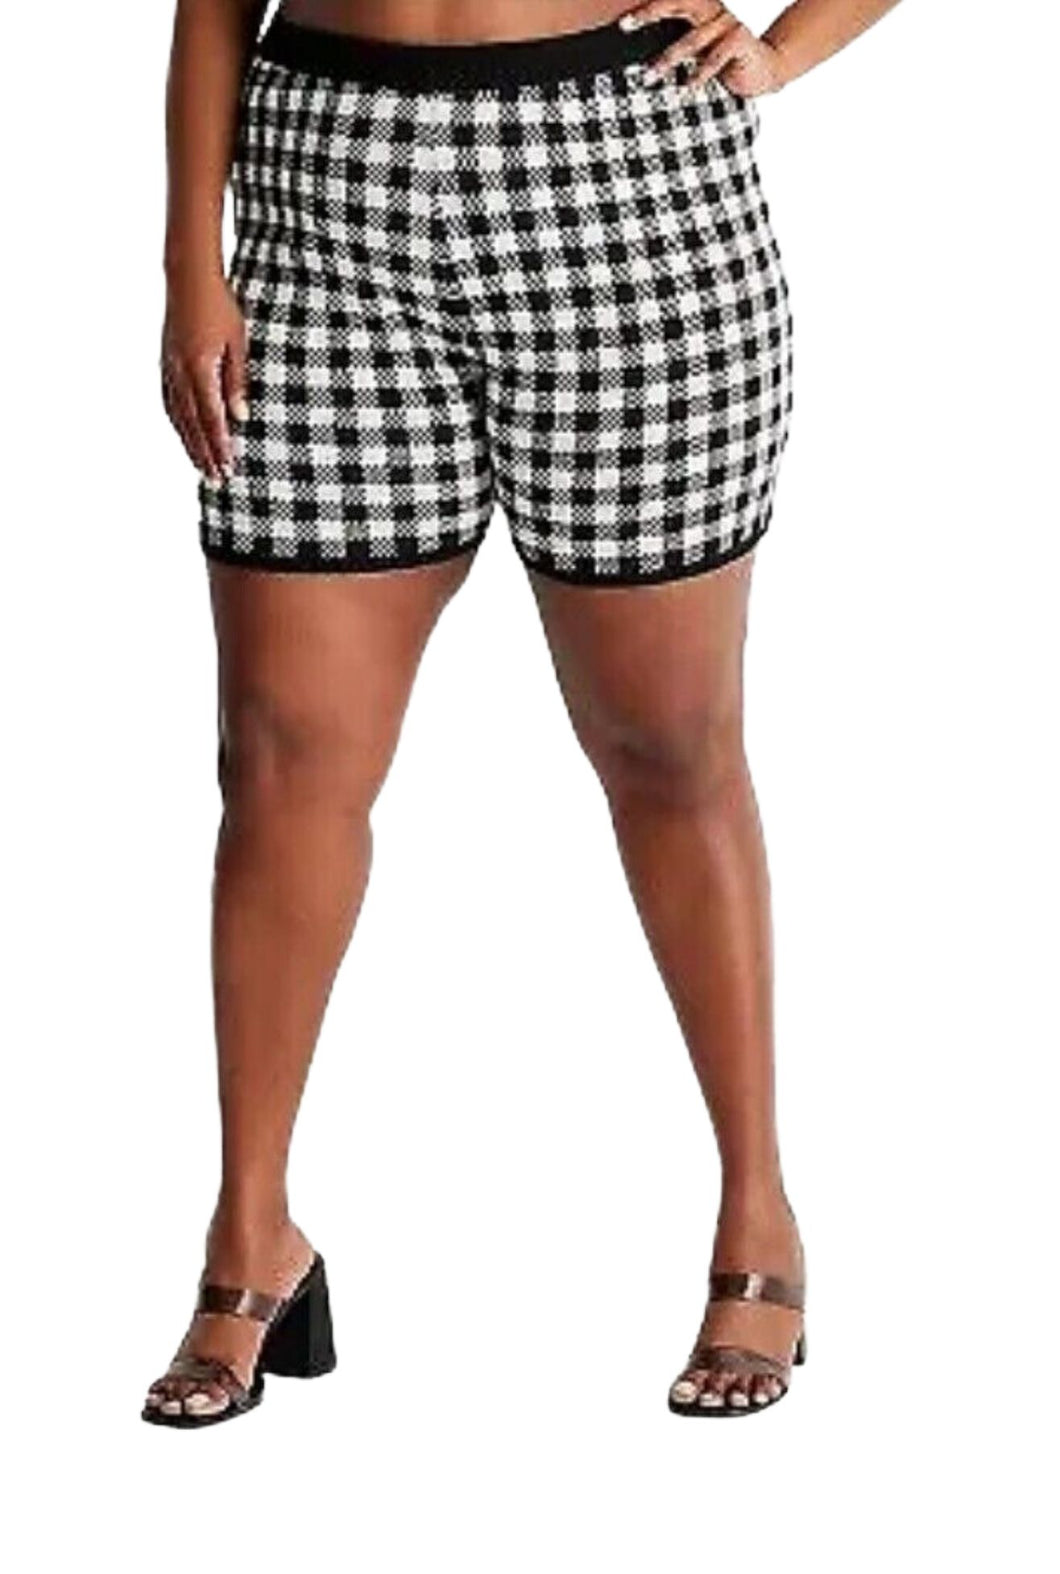 Future Collective Black and White Gingham Shorts, Size XL